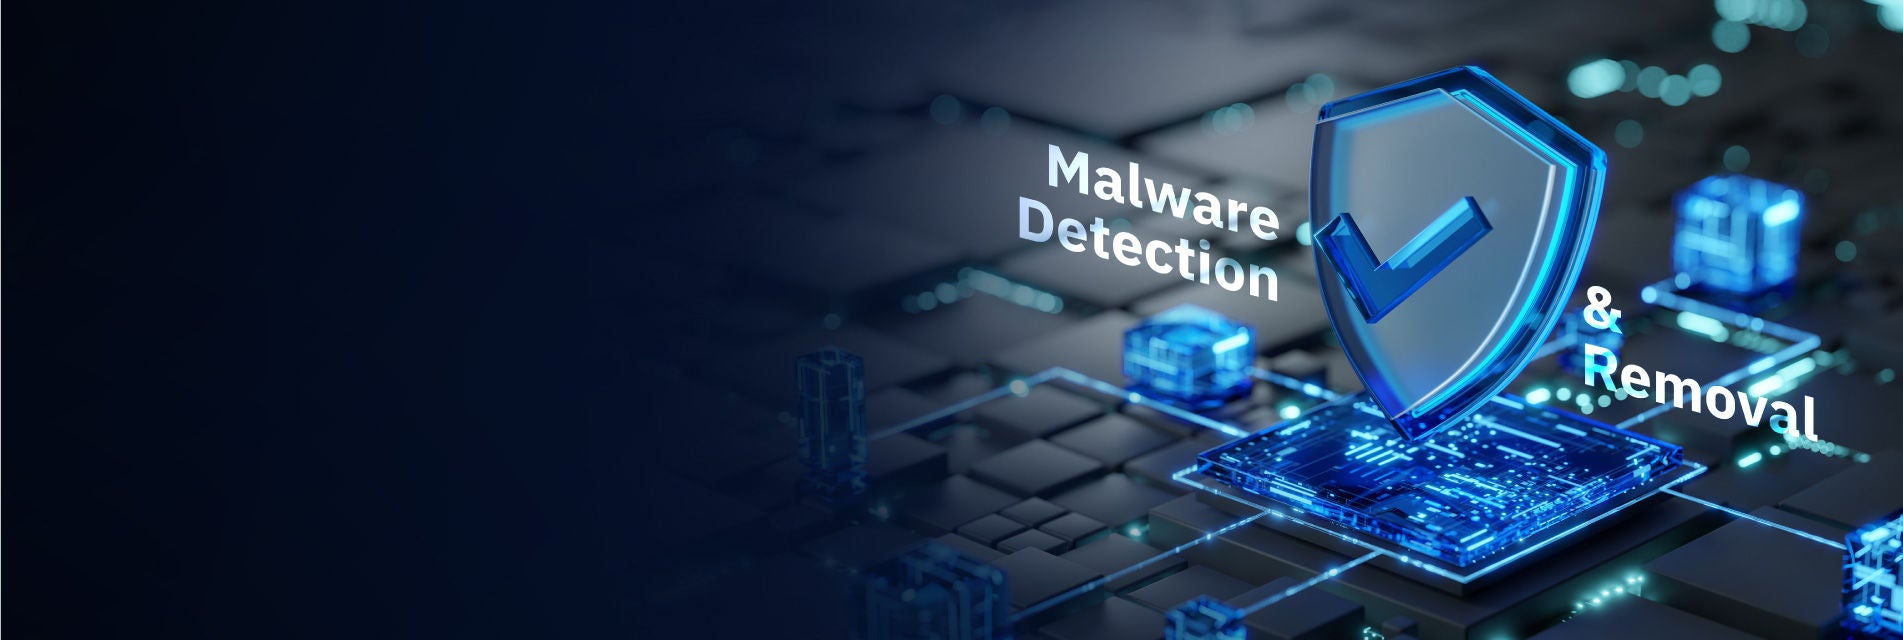 malware detection and removal